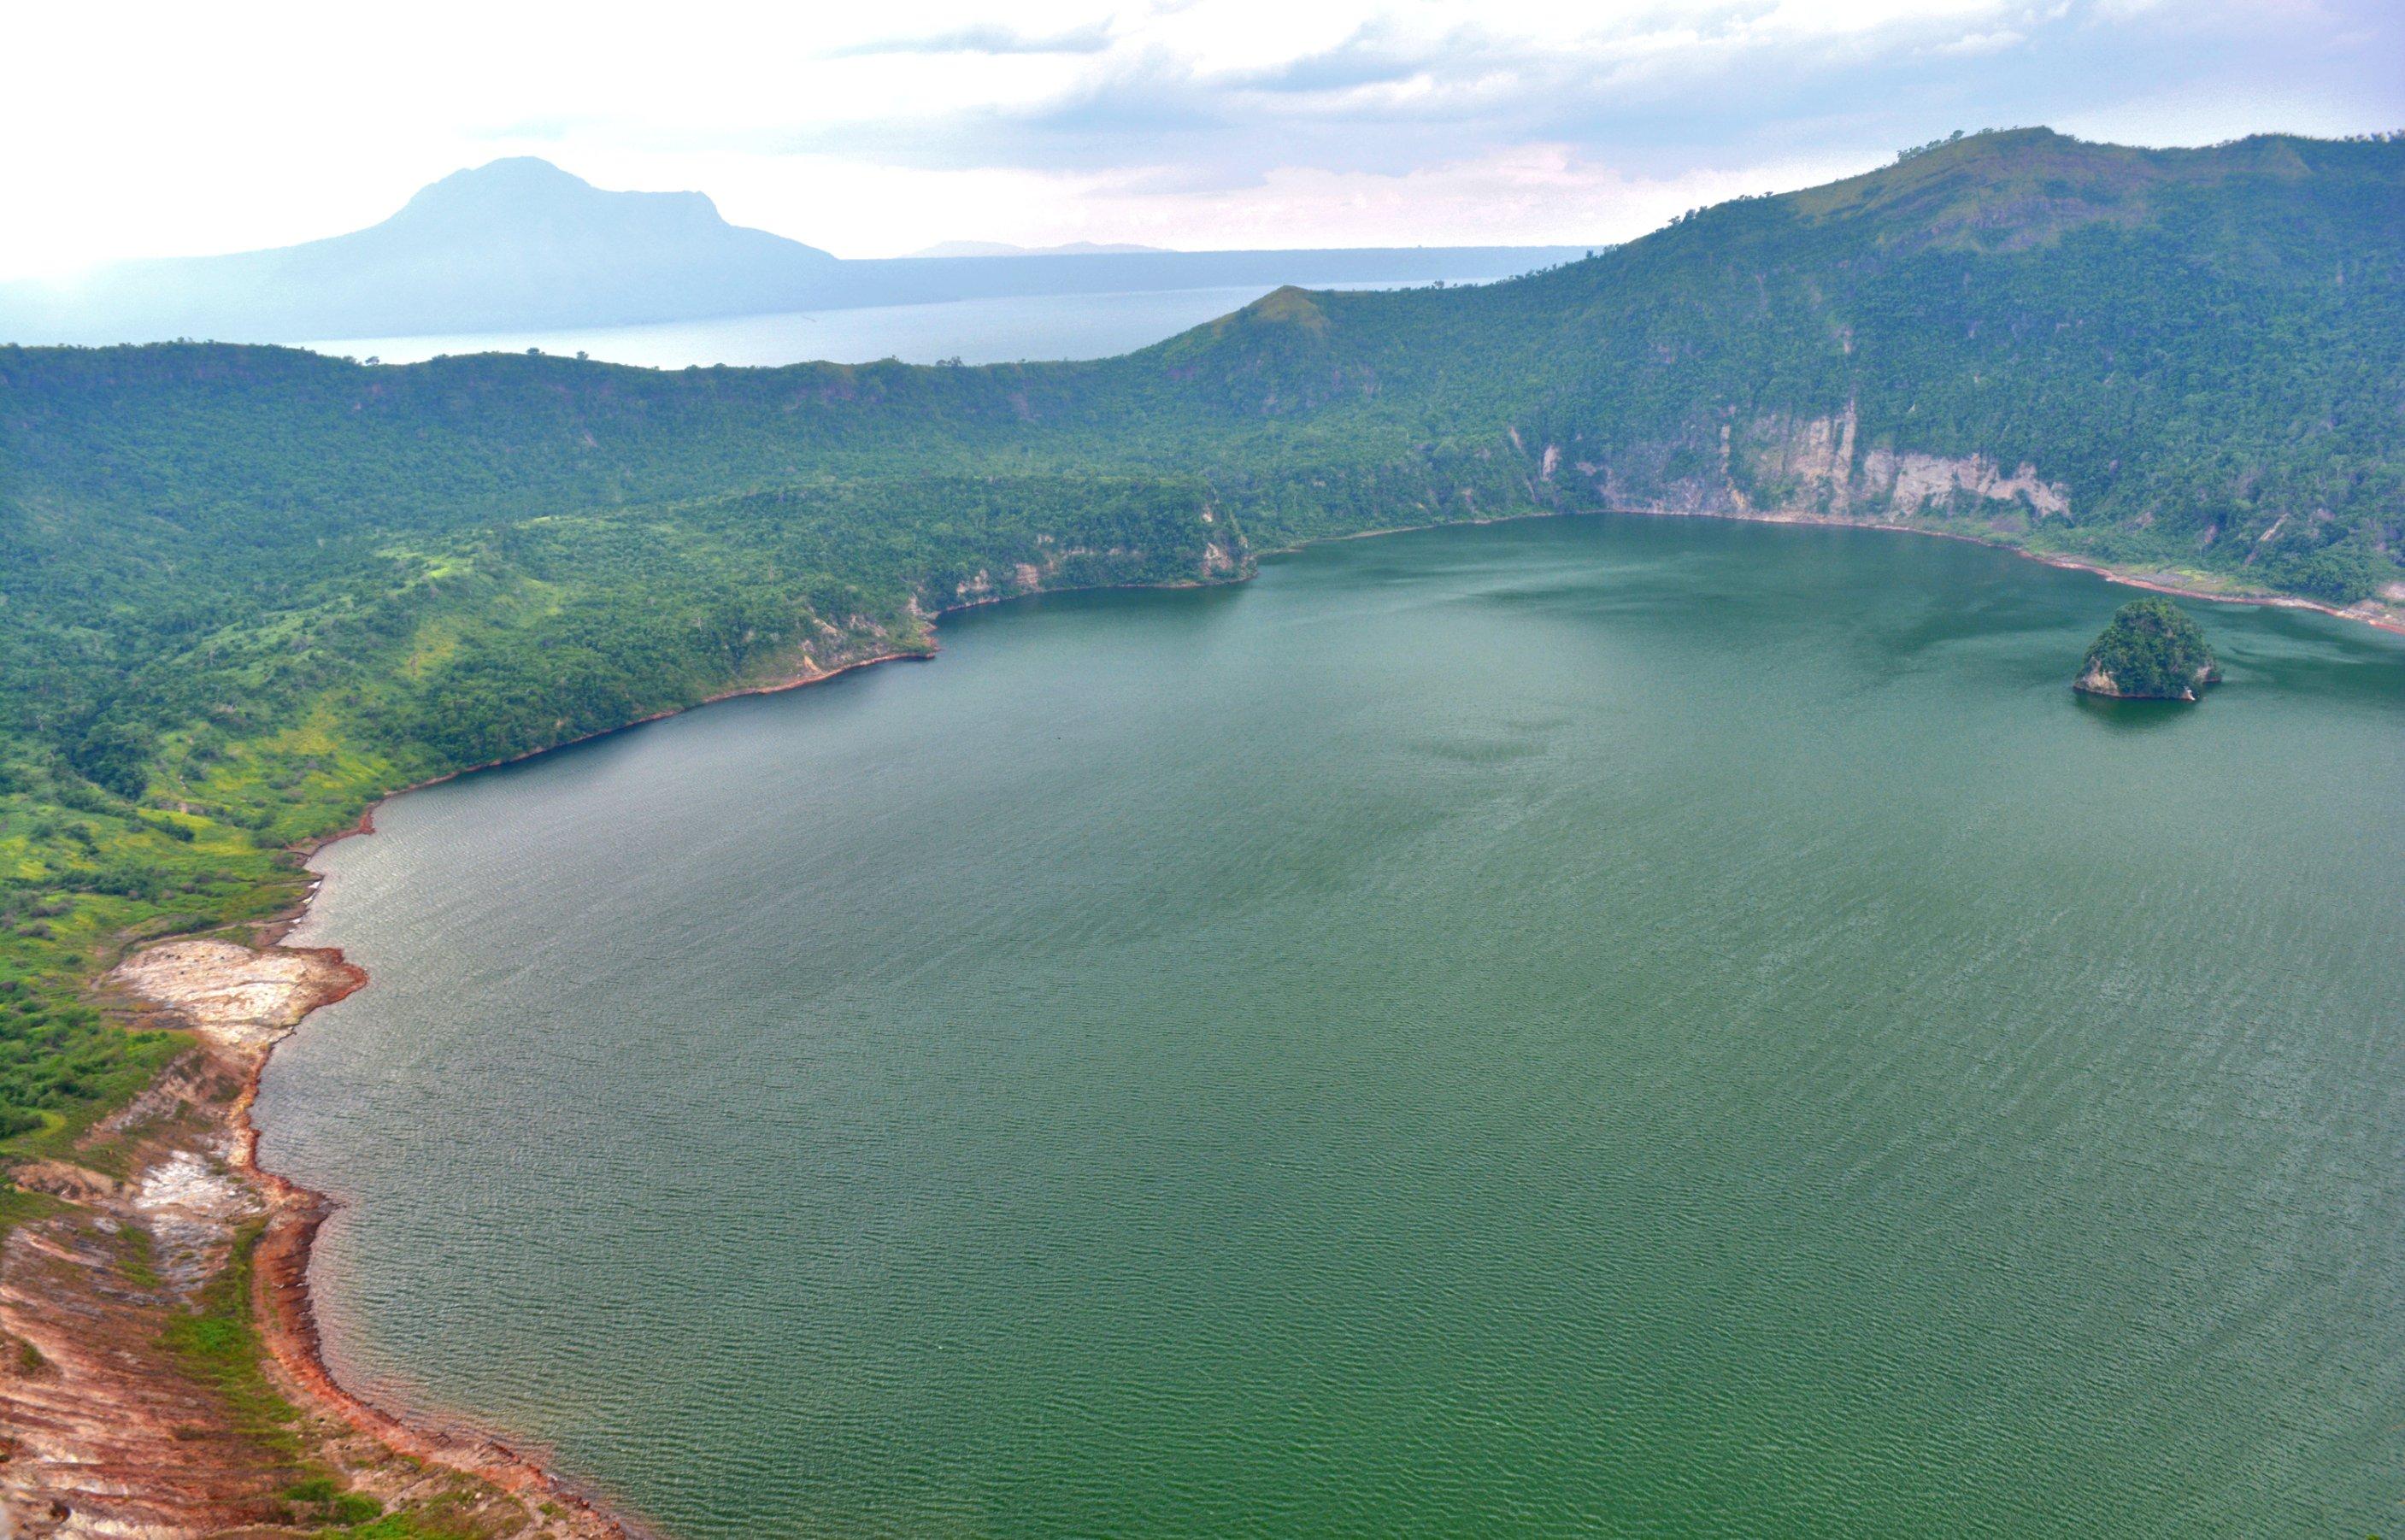 Taal Volcano in the Philippines: Danger, beauty - and golf!. CNN